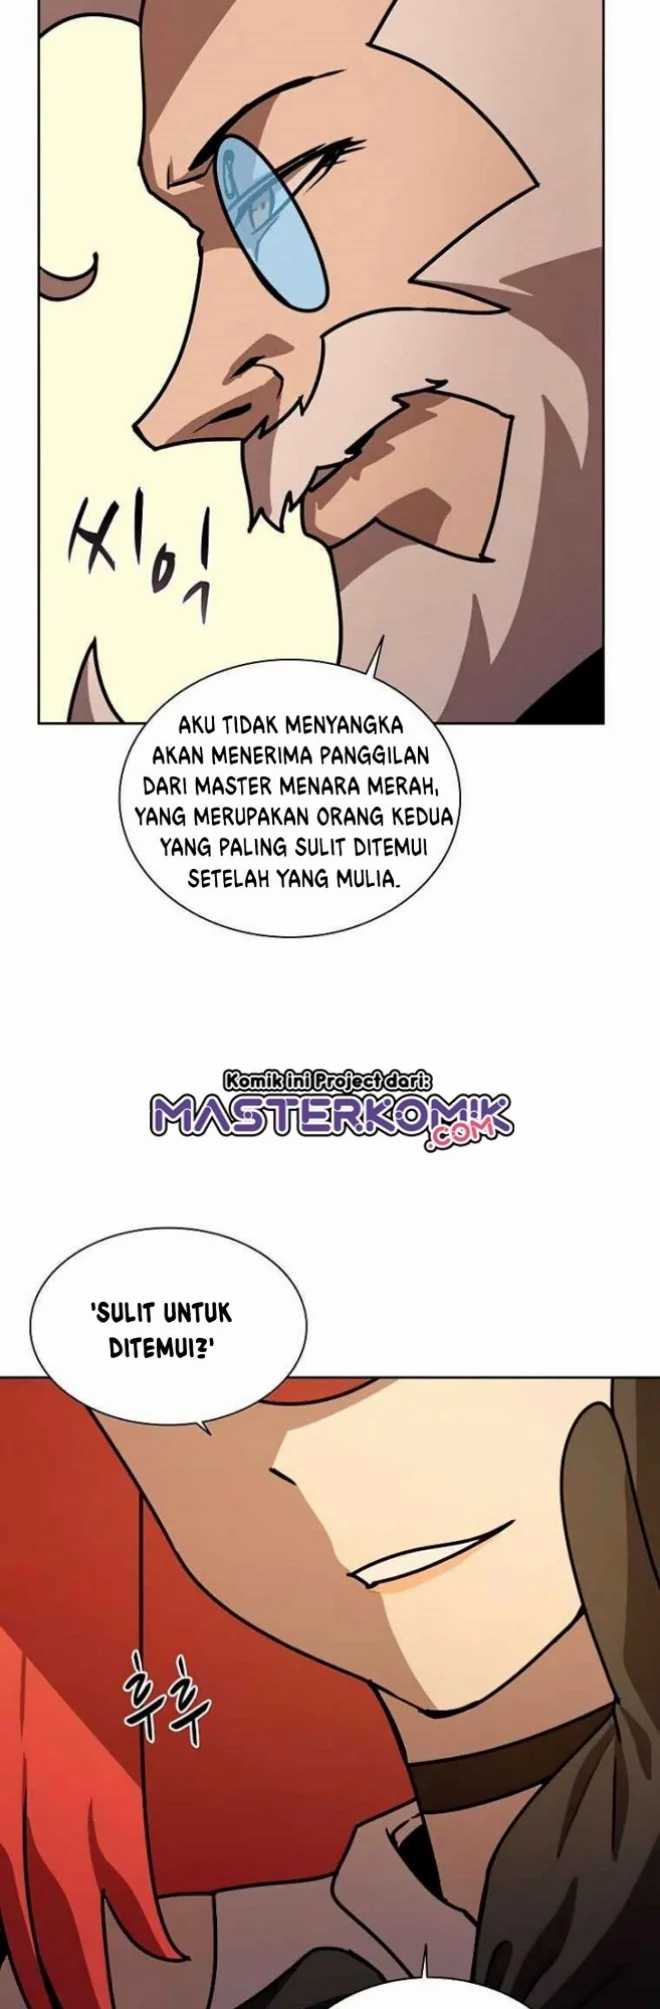 The Book Eating Magician Chapter 43